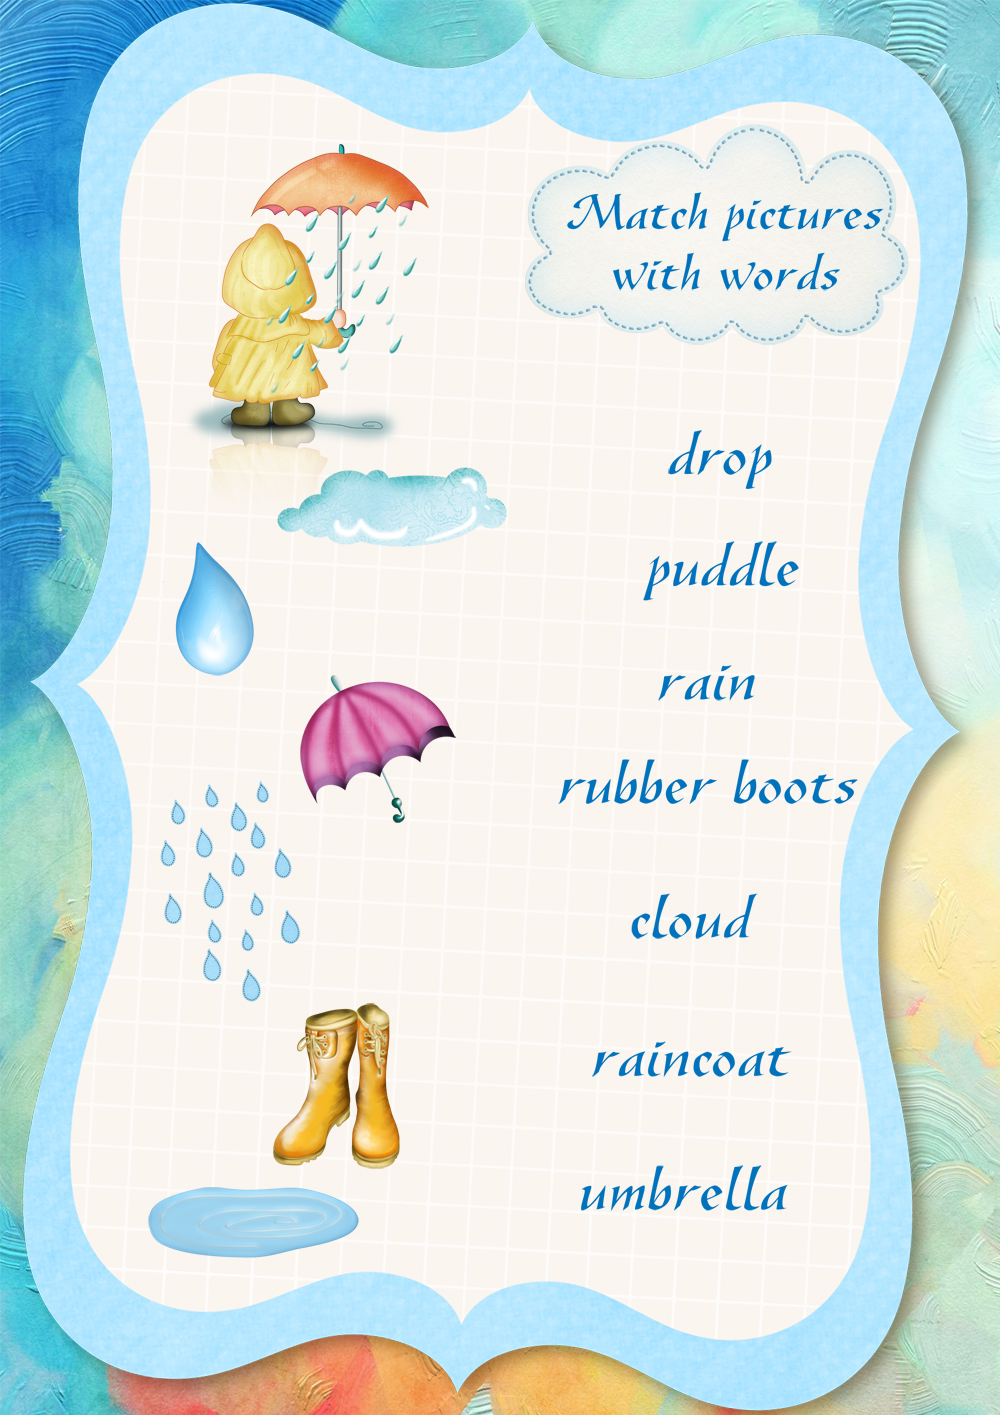 that weather weather learners  weather worksheets kids learn pdf young will help worksheets the about for